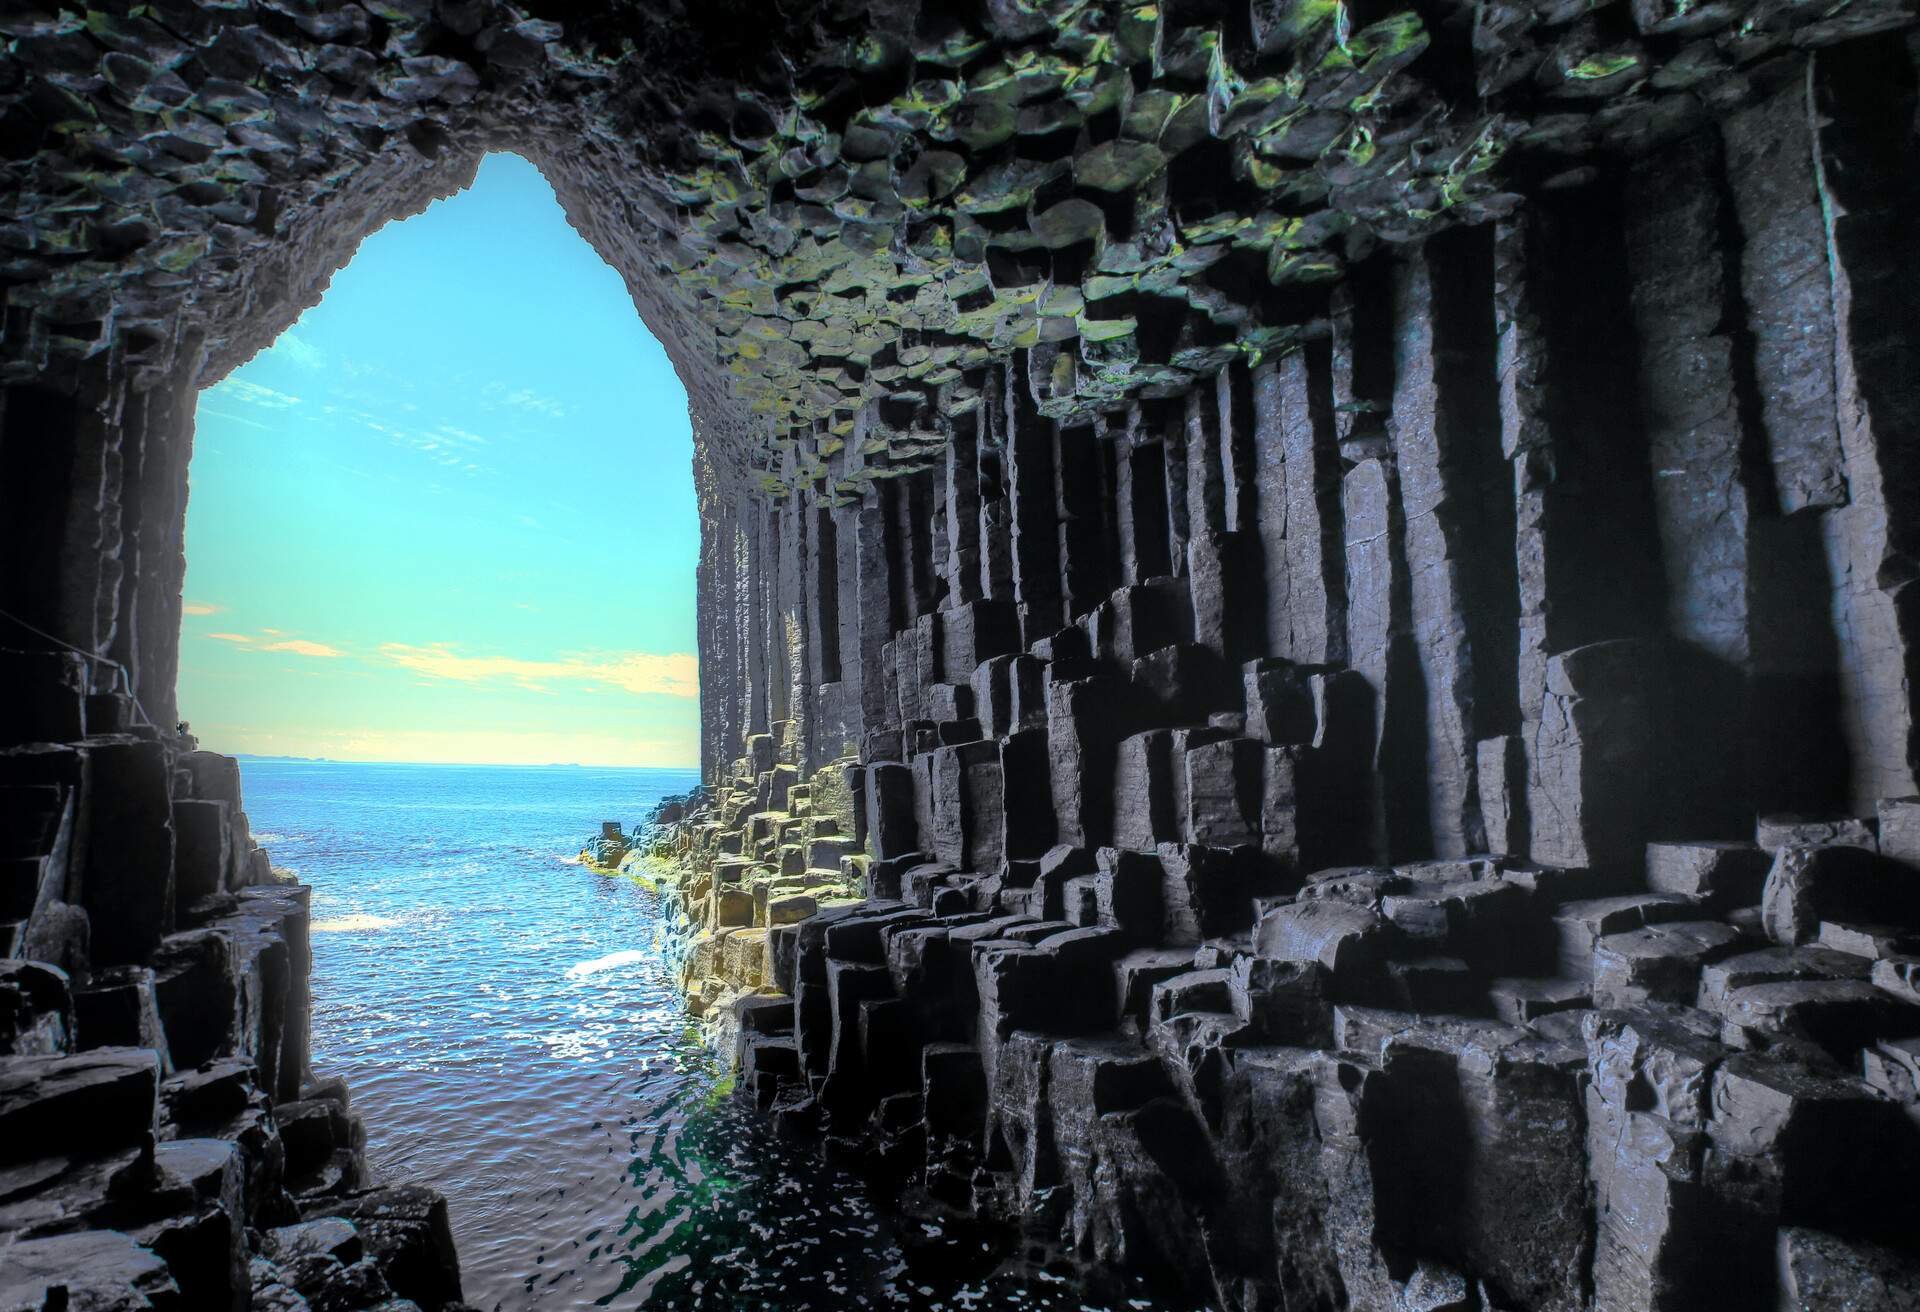 Scotland's famous basalt formations and cave